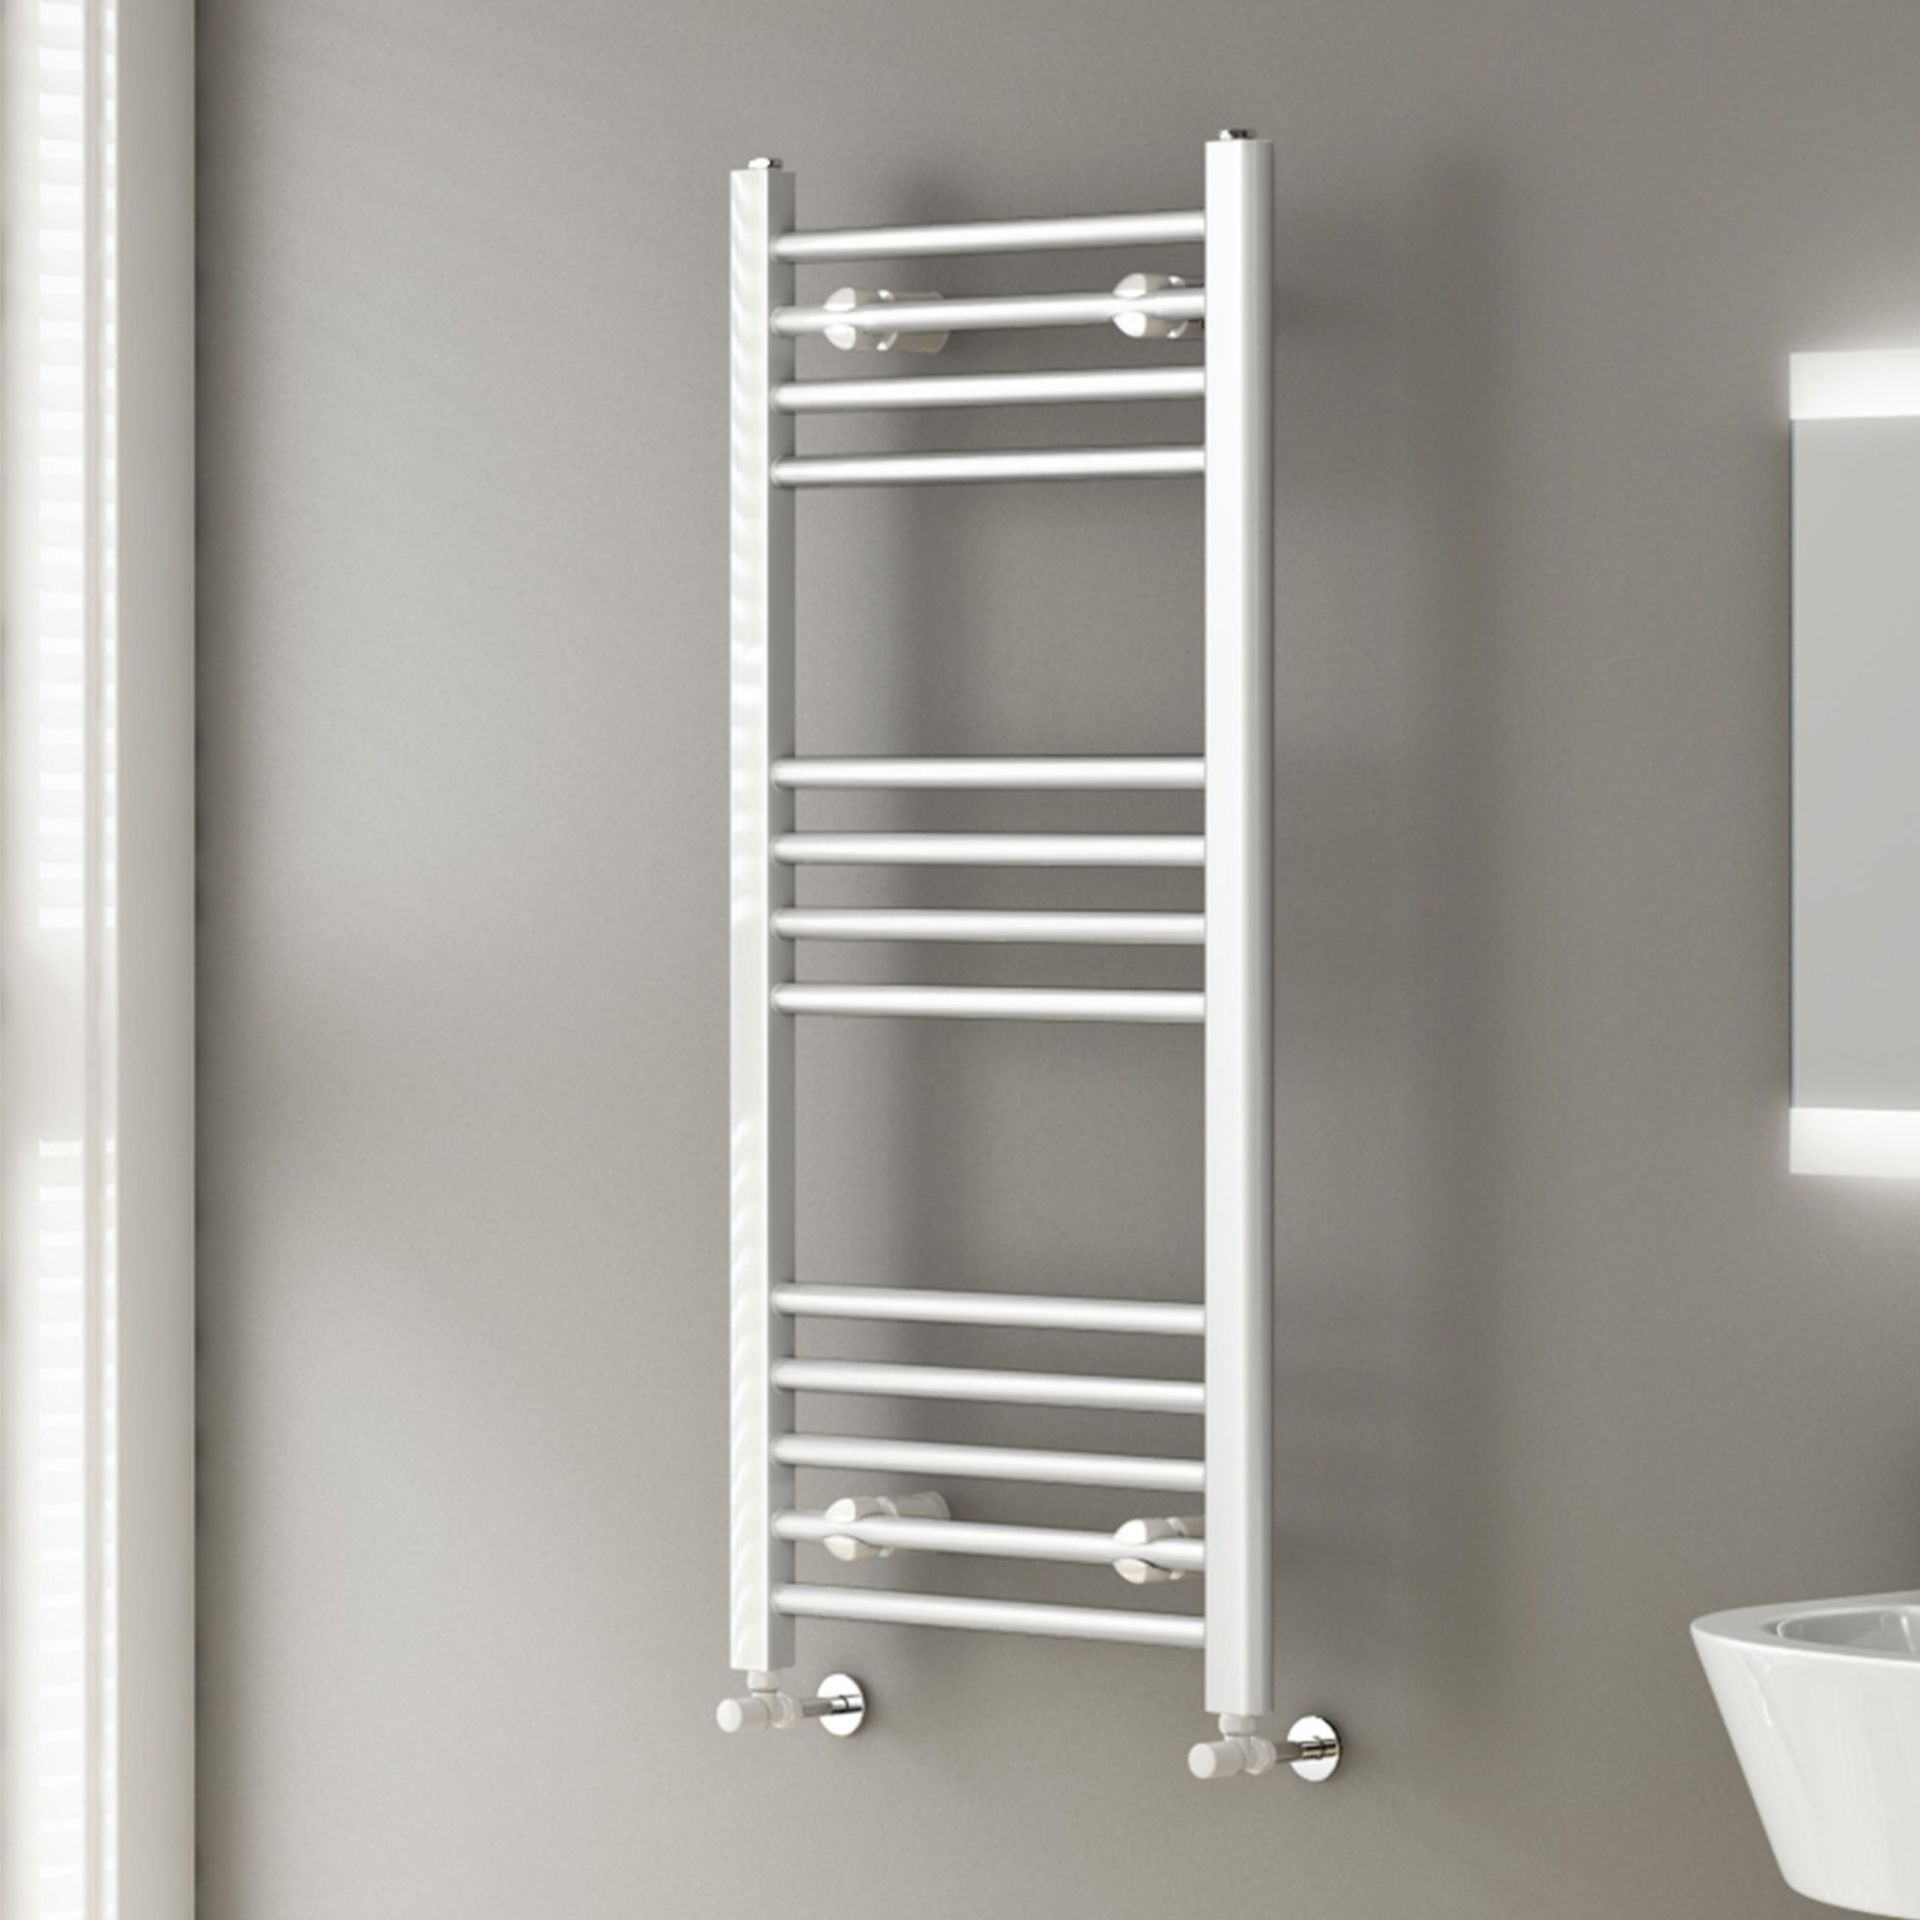 (ZL235) 1000x600mm White Straight Rail Ladder Towel Radiator. Made from low carbon steel Finished